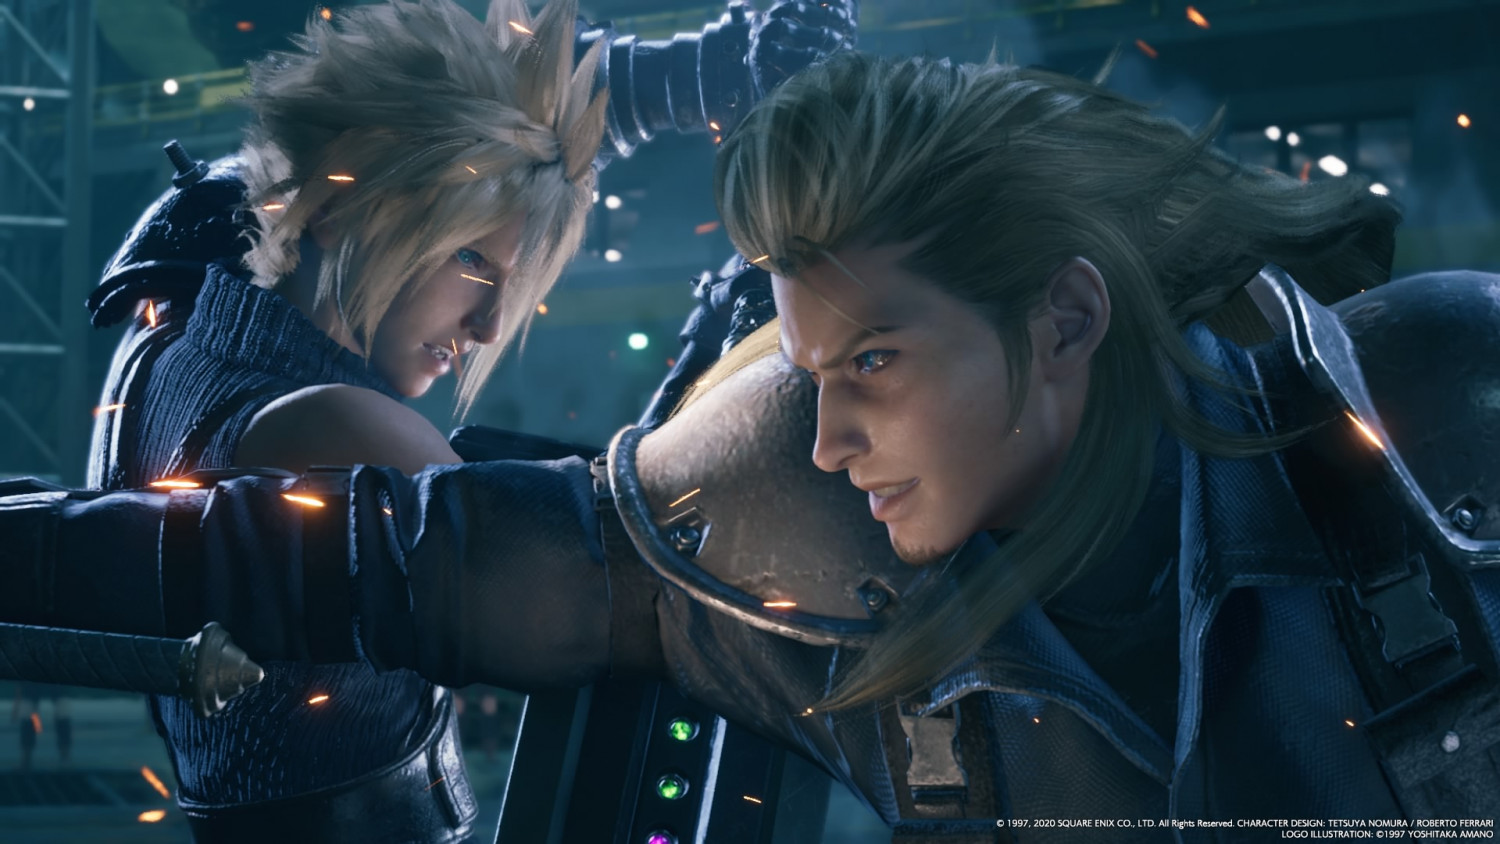 Final Fantasy 7 Remake review: A loving reimagining of the